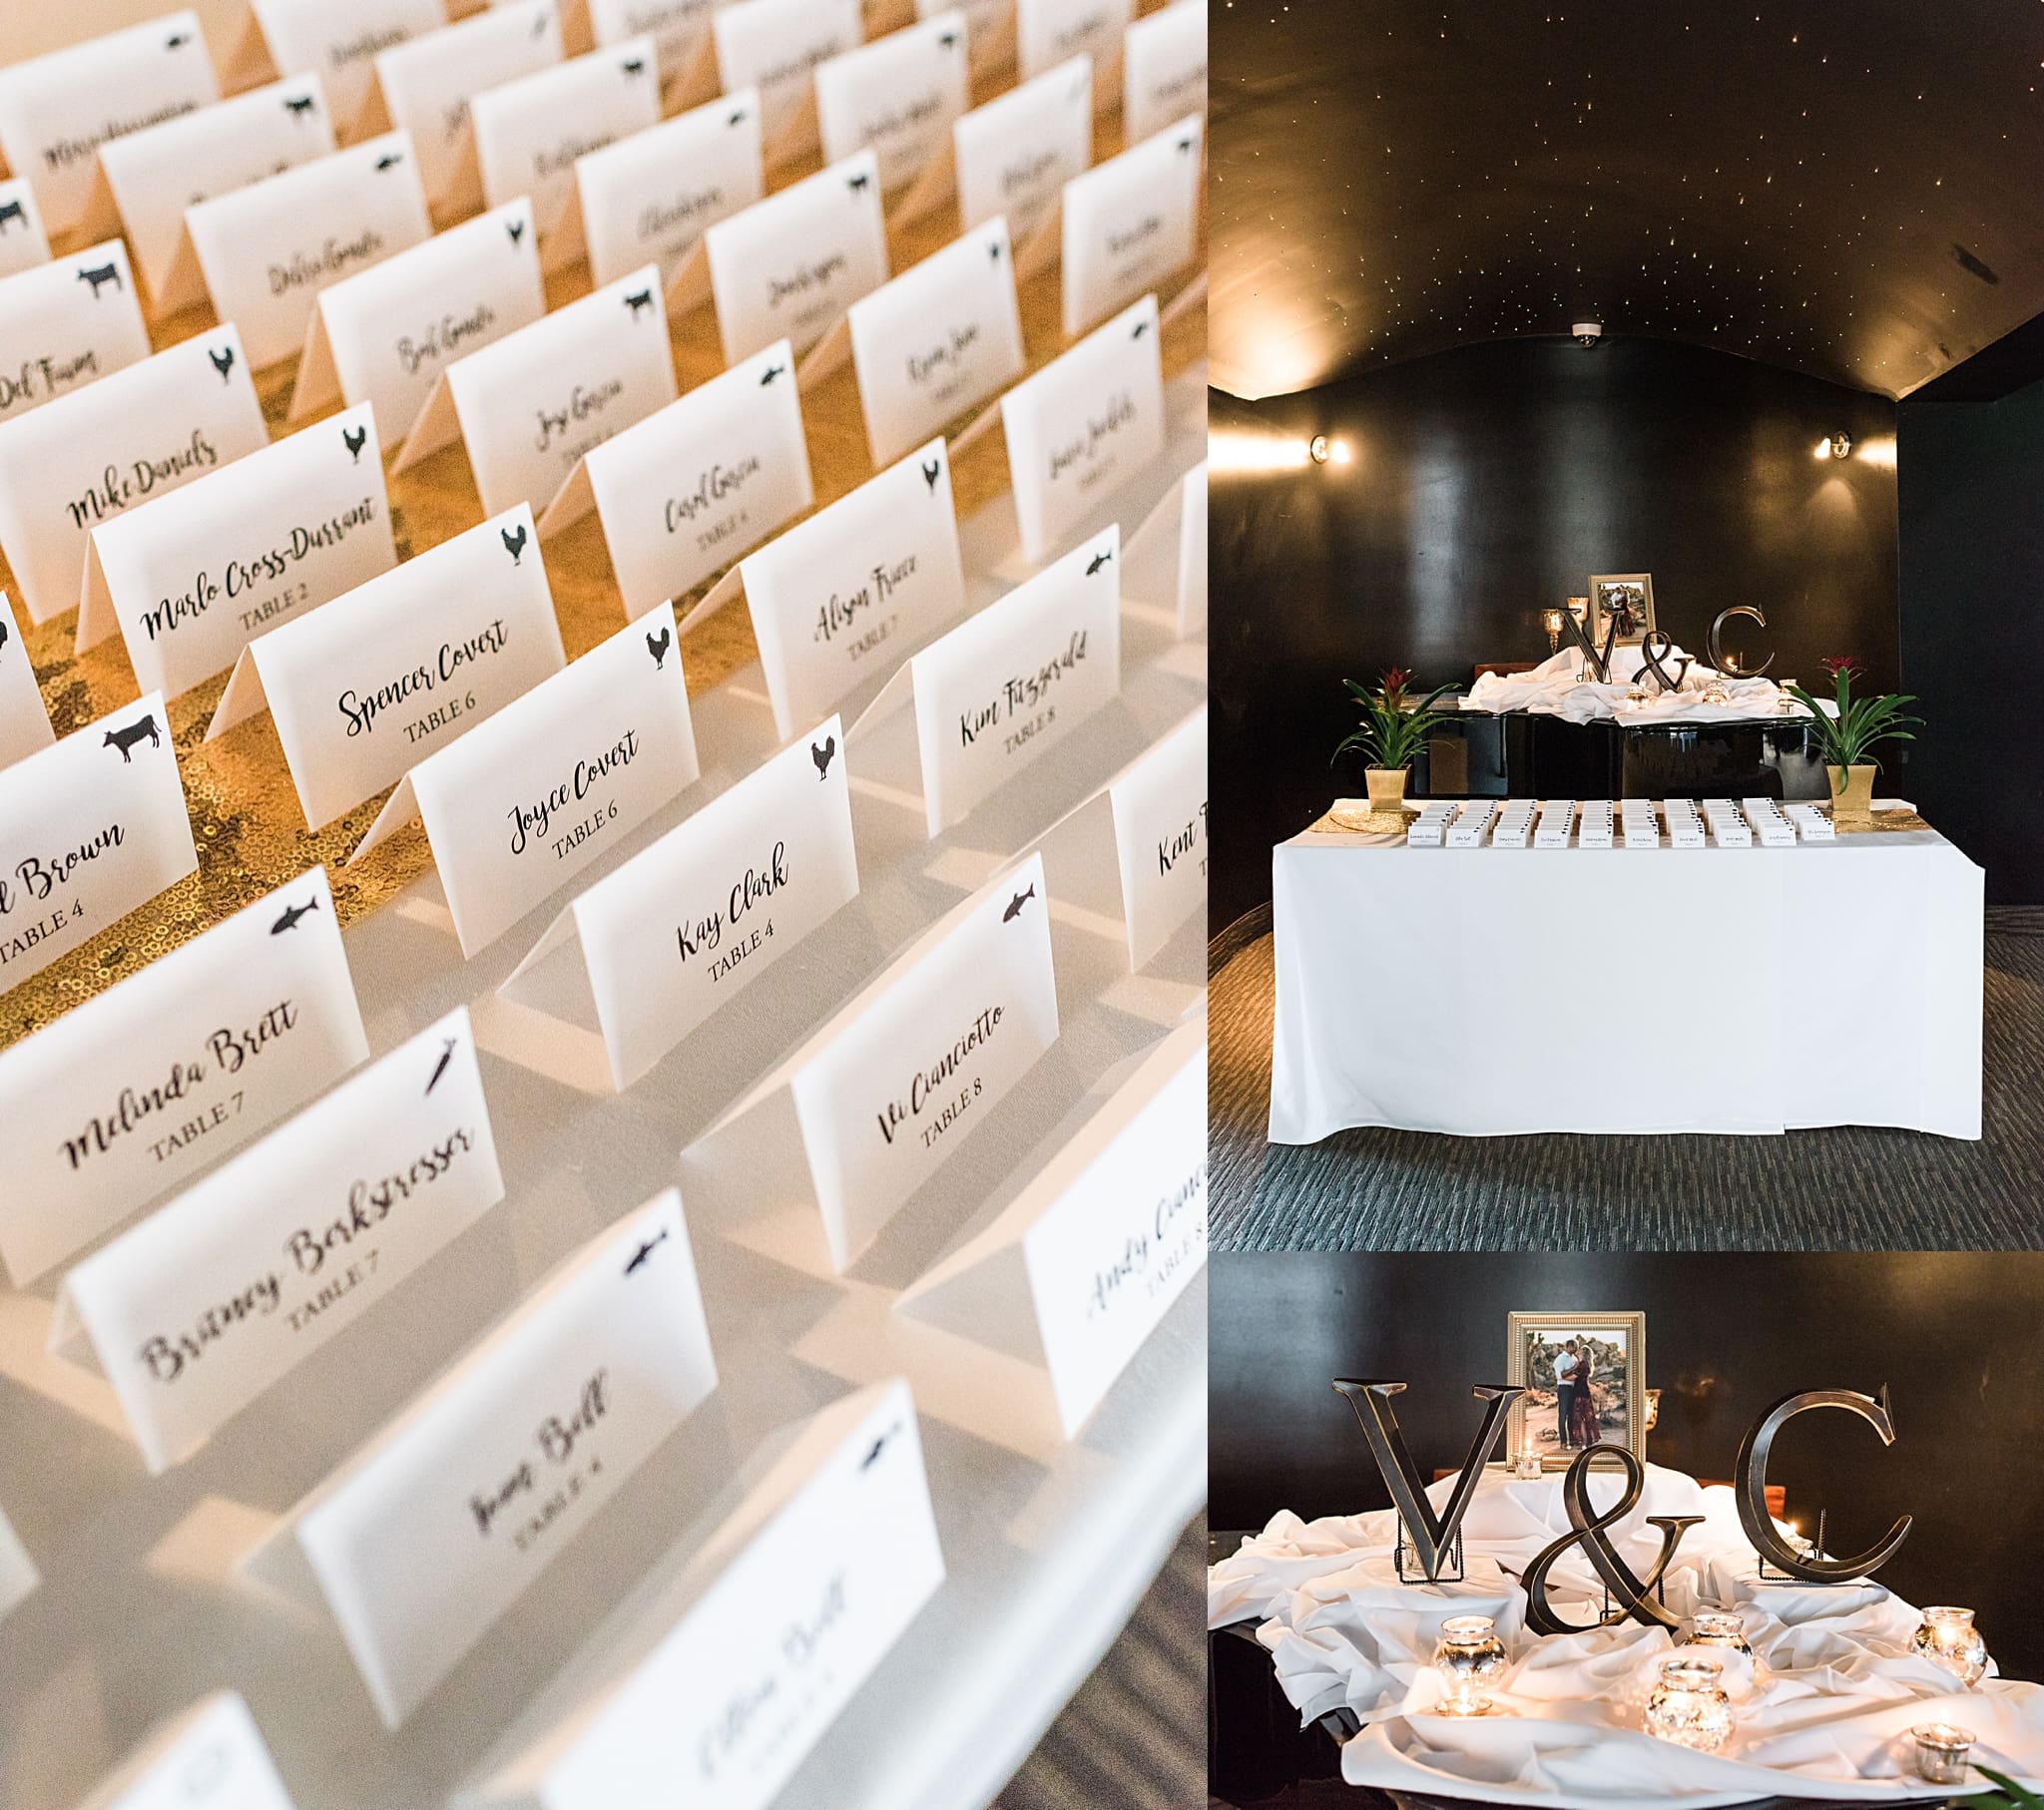 wedding reception welcome table with place cards